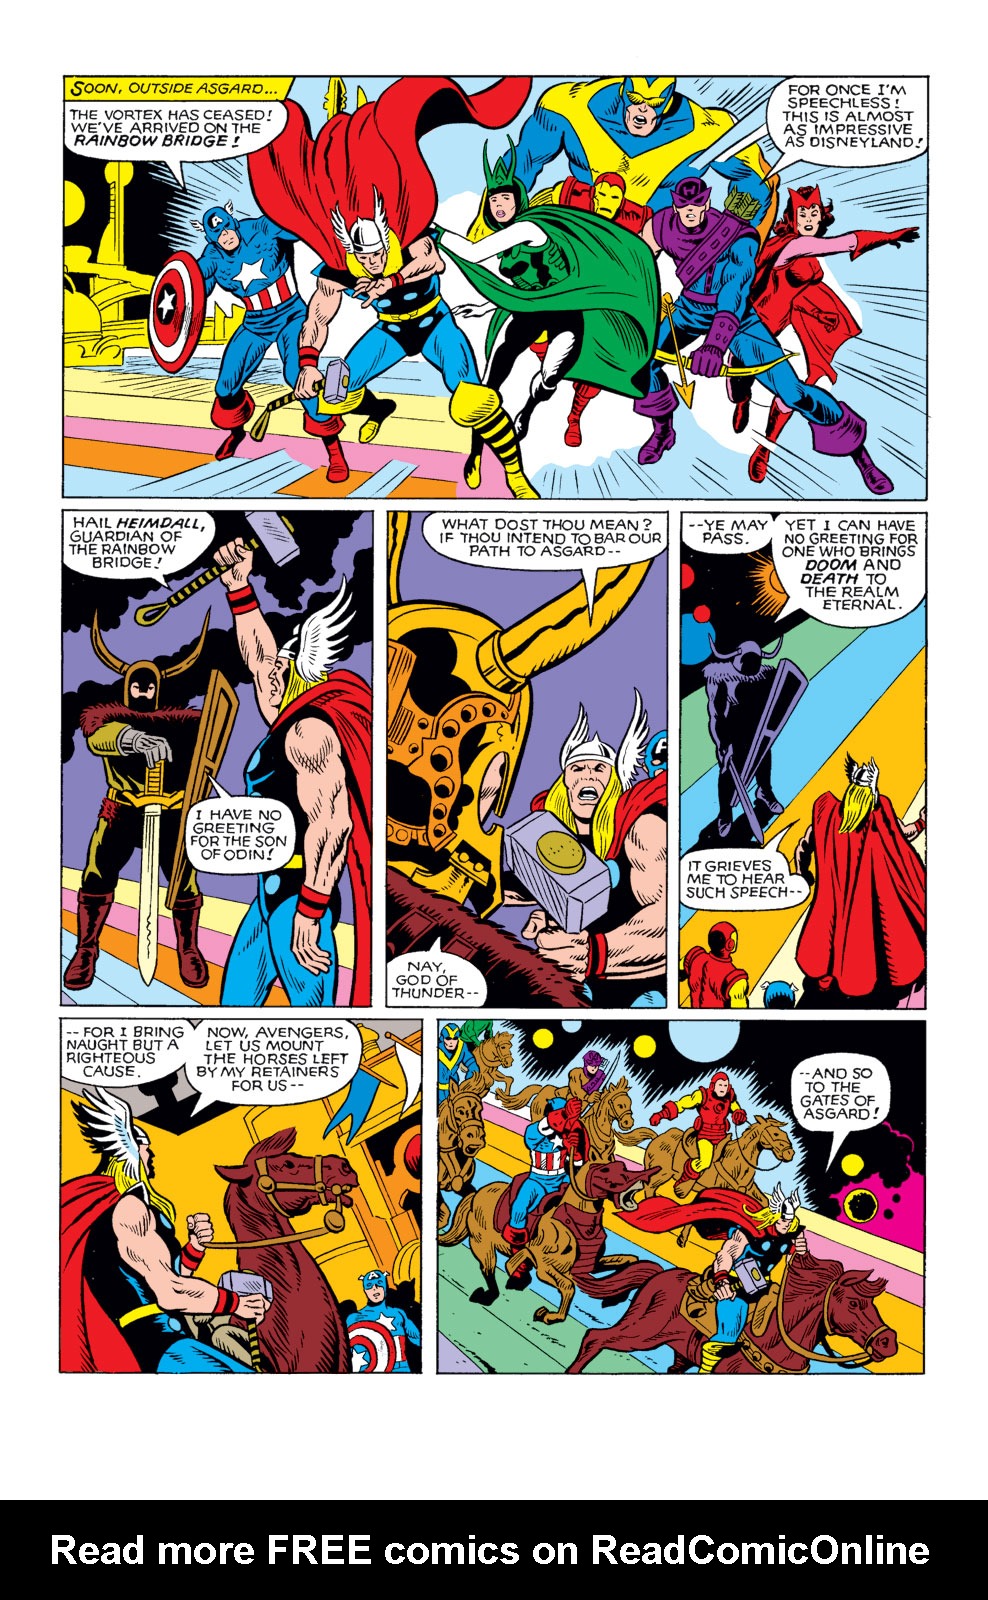 What If? (1977) issue 25 - Thor and the Avengers battled the gods - Page 9